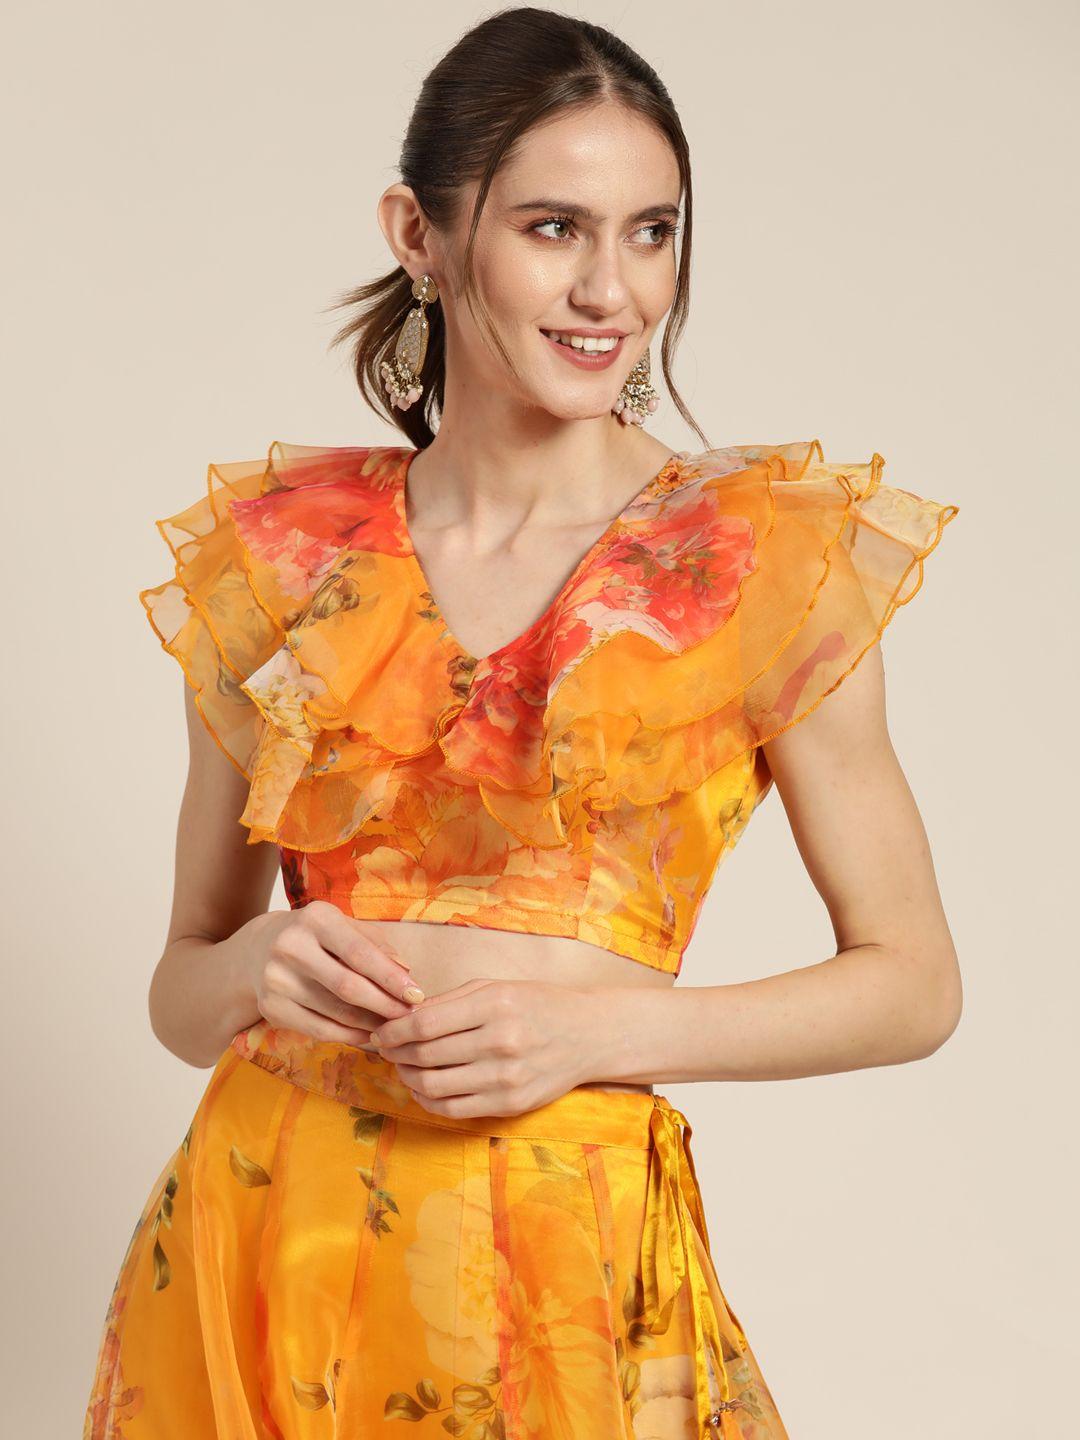 shae-by-sassafras-yellow-&-red-floral-printed-layered-organza-crop-top